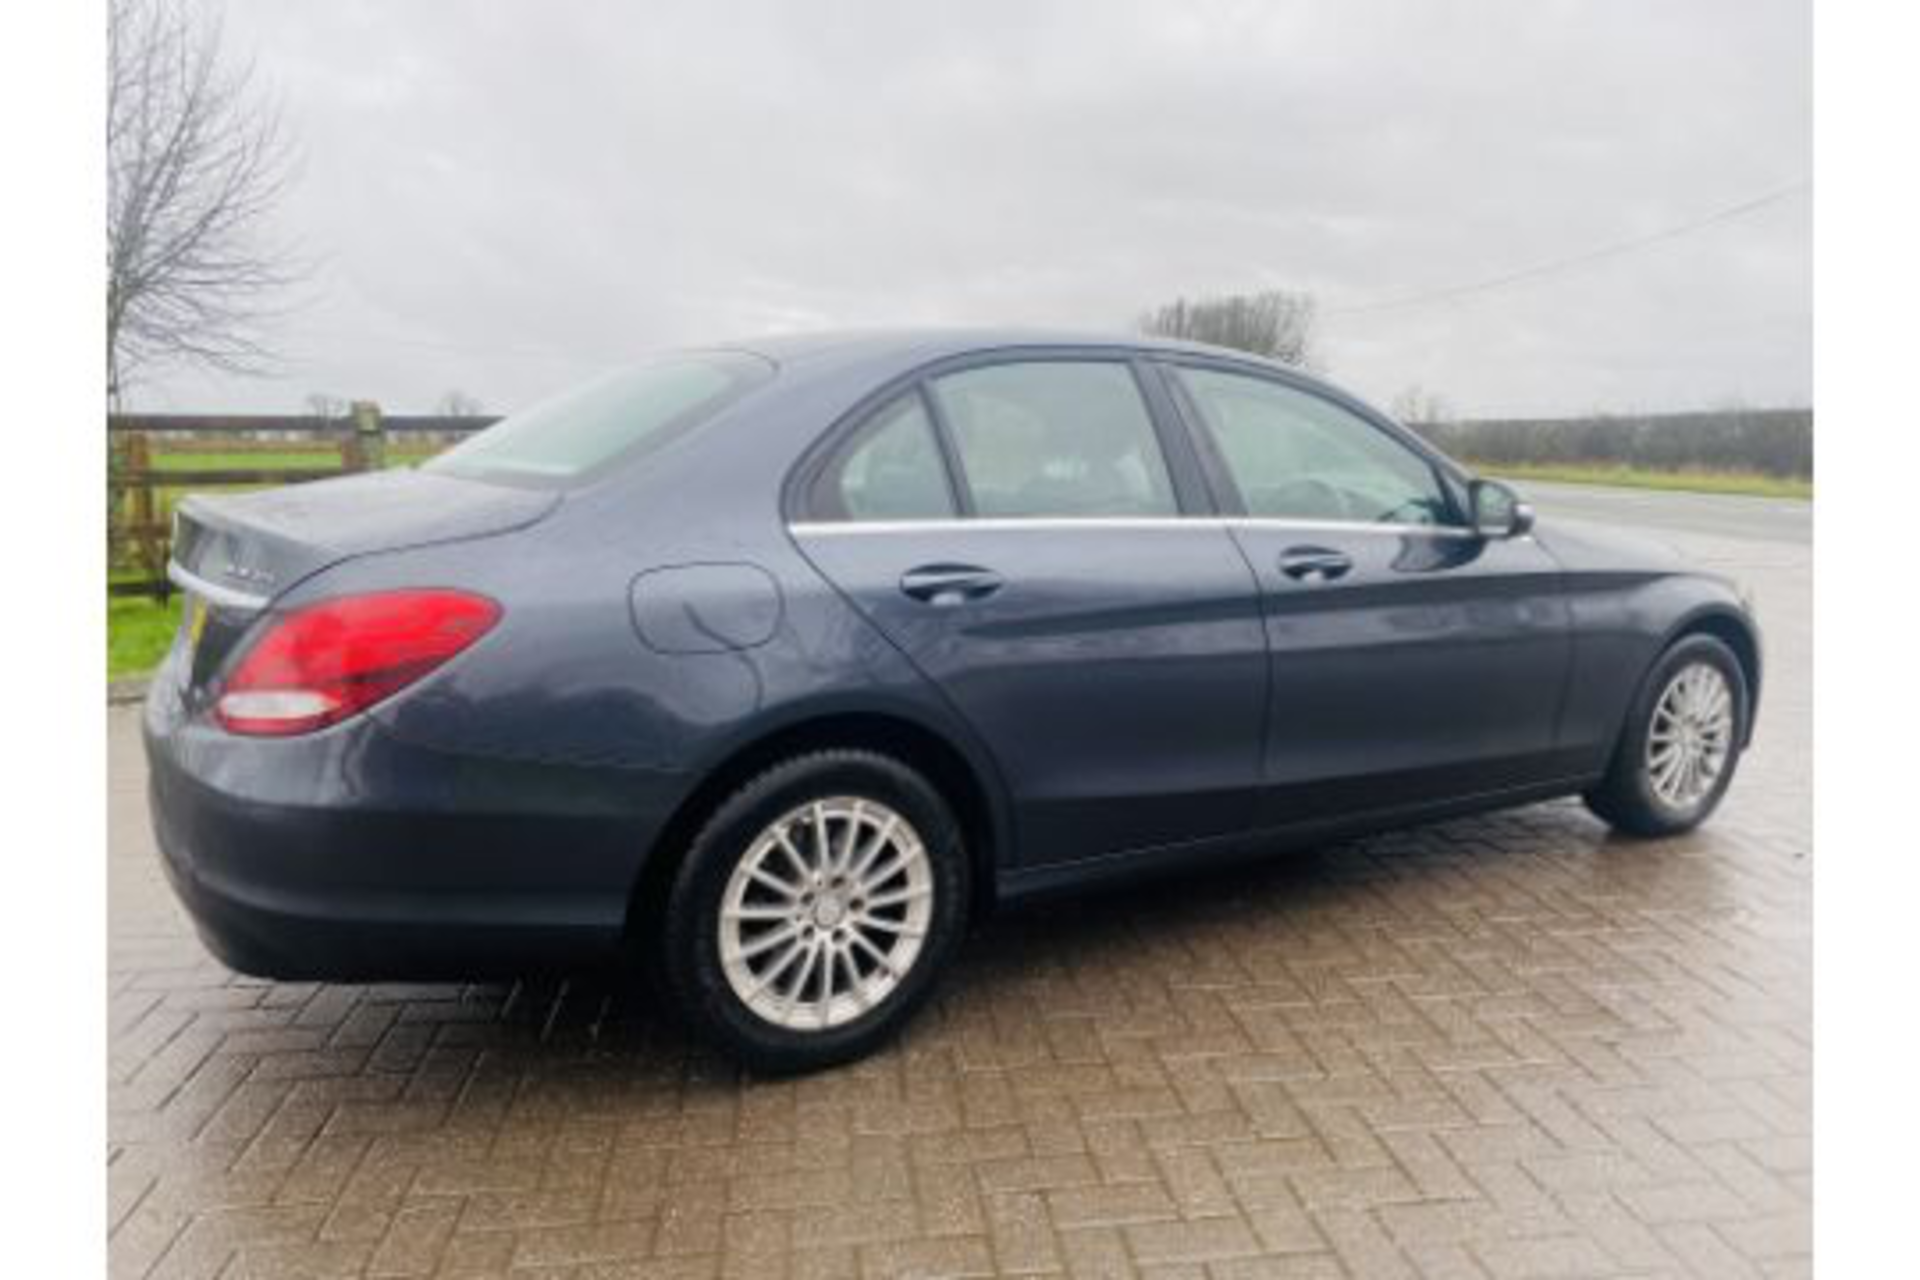 MERCEDES C220d "SPECIAL EQUIPMENT" SE SALOON - 2016 MODEL - LEATHER - NEW SHAPE - AIR CON - NO VAT!! - Image 5 of 26